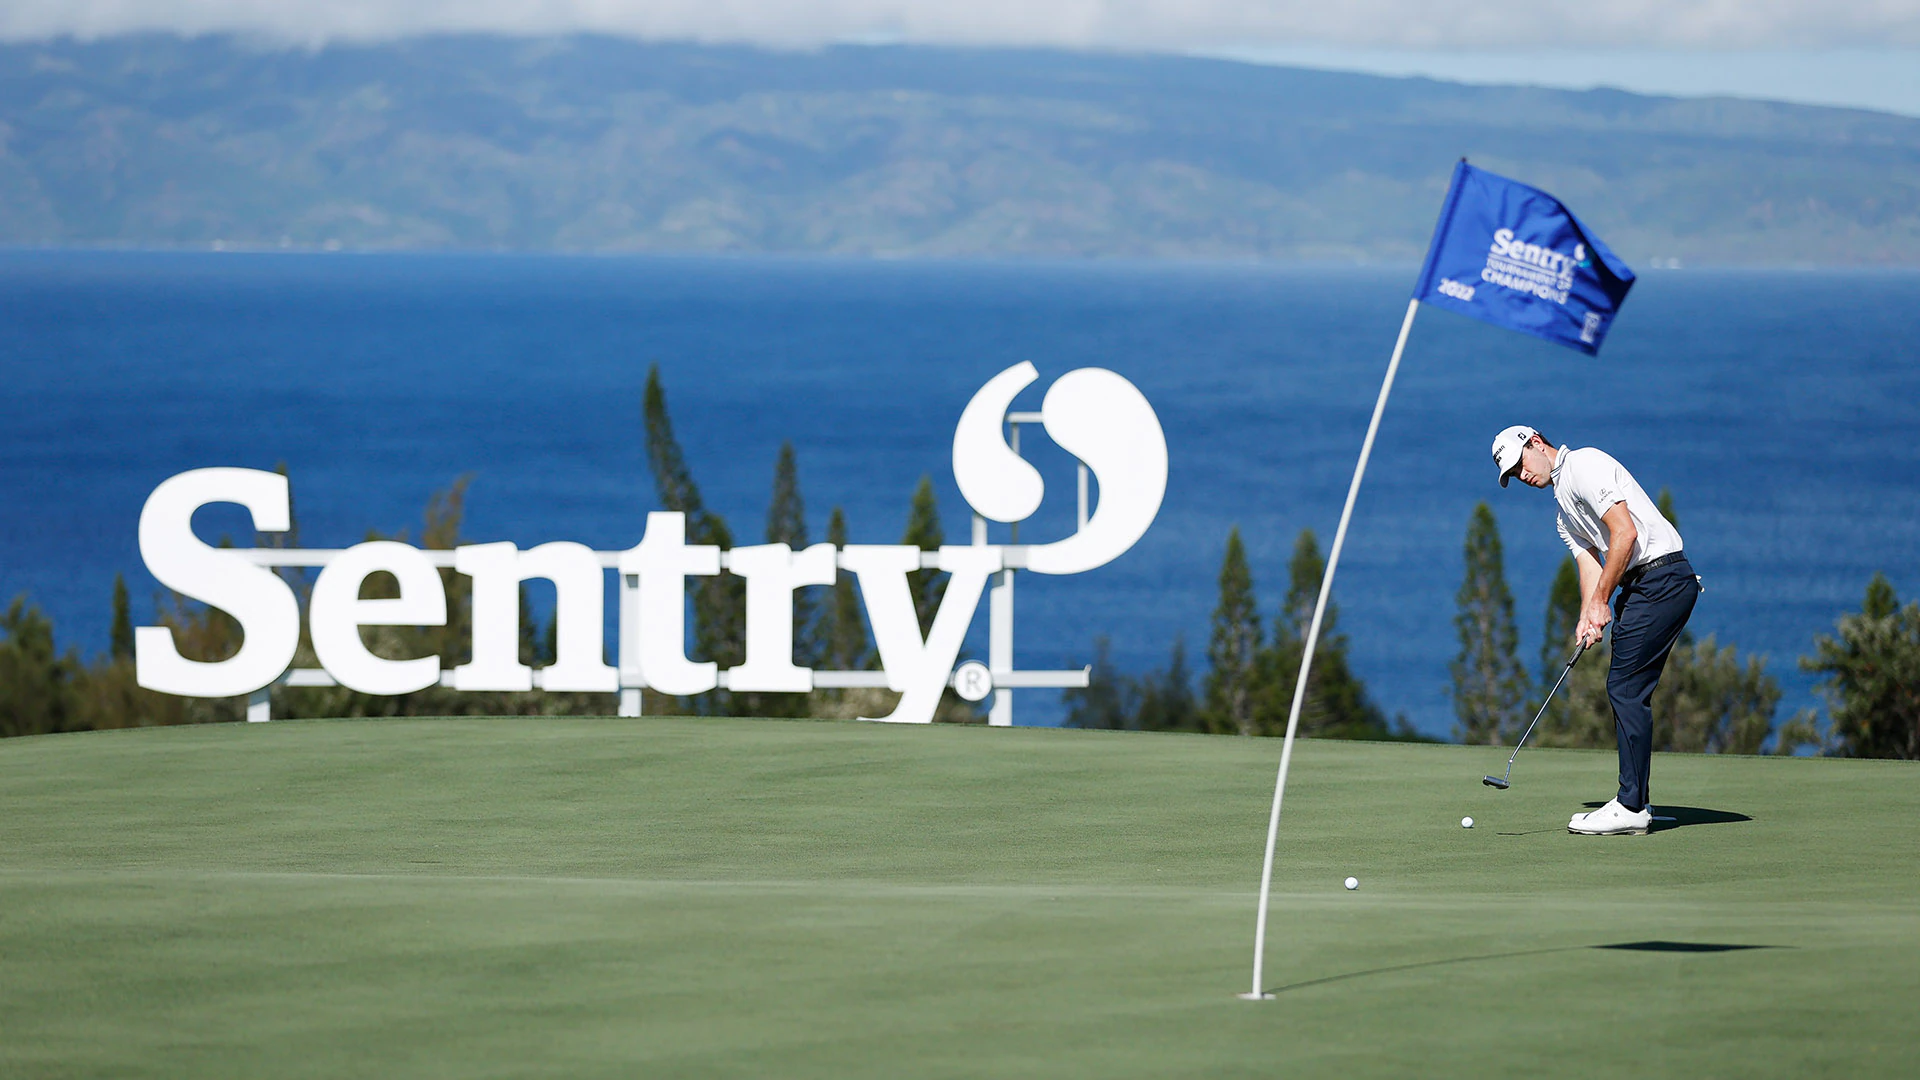 After 100 days away, Patrick Cantlay returns from break at Kapalua